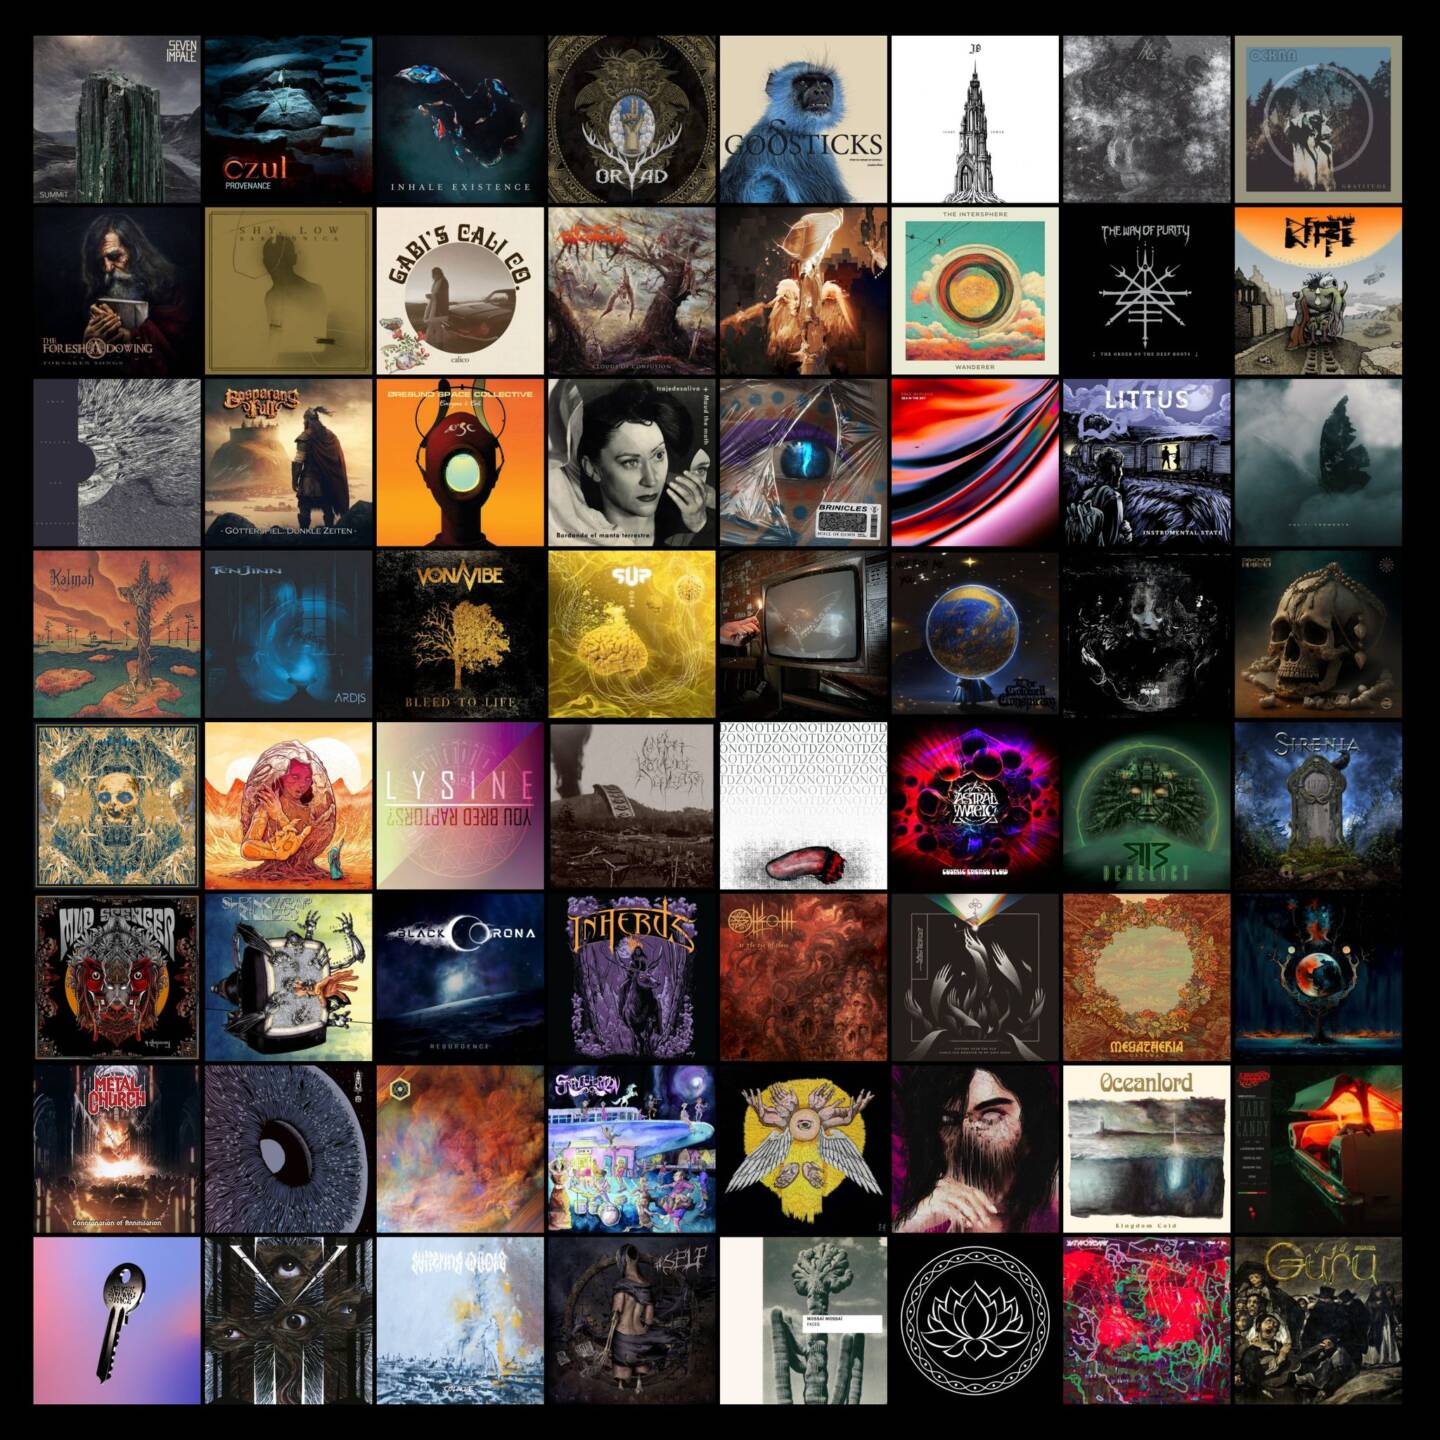 76 releases, 11 highlights: one record number is chasing the next